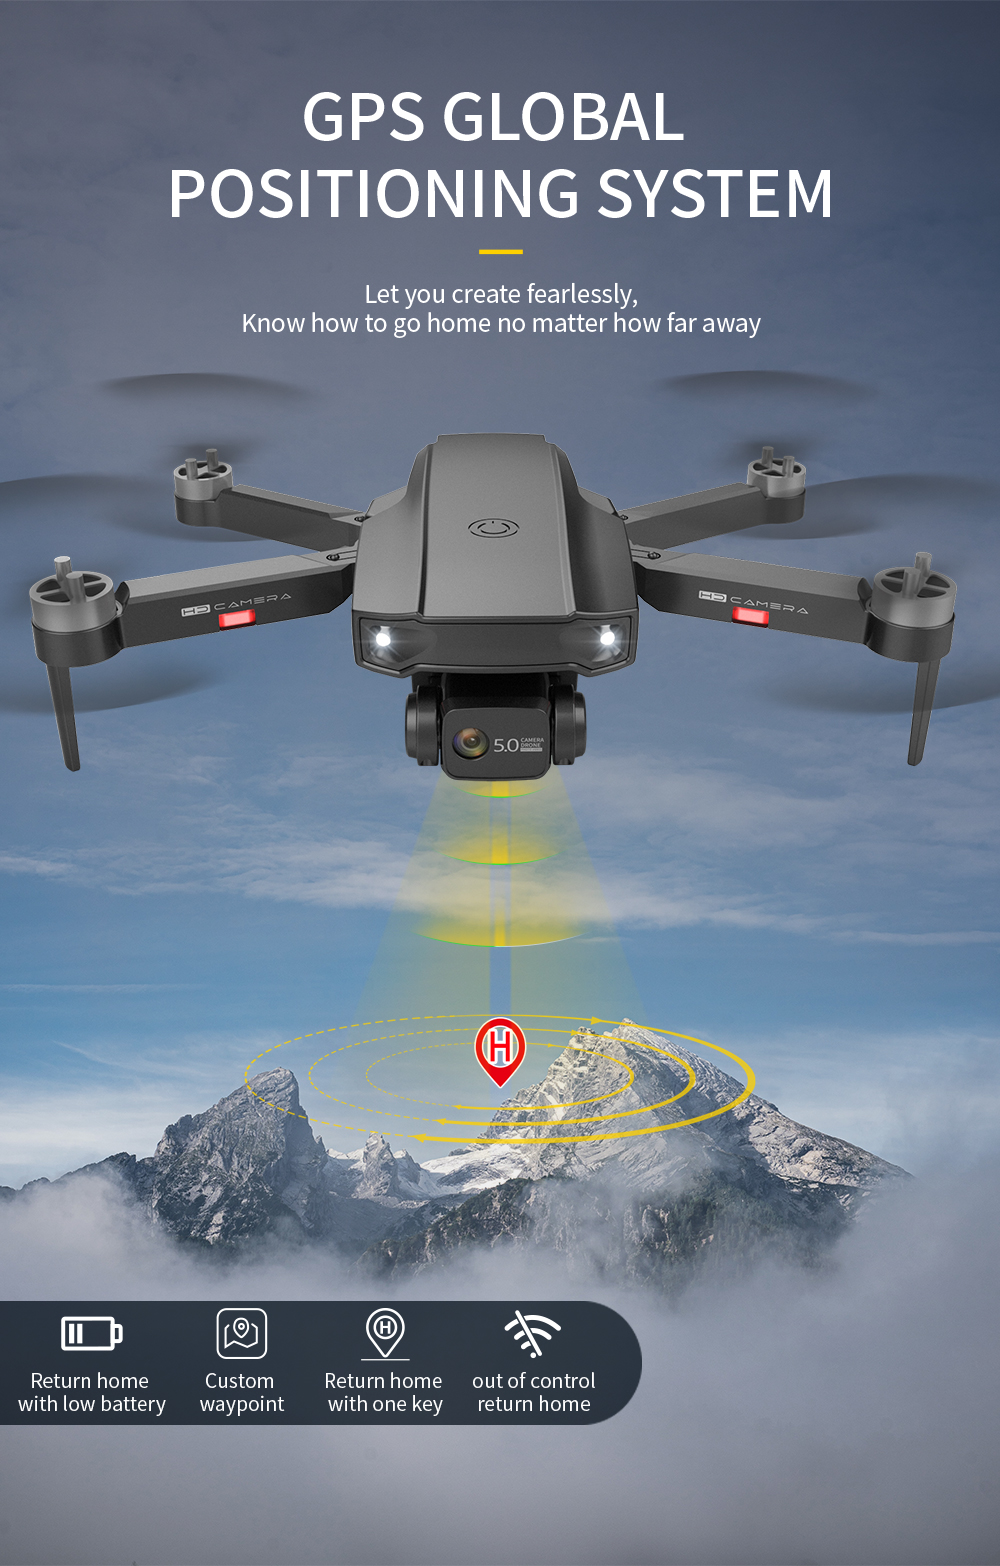 HJ188-GPS-5G-WiFi-1KM-FPV-with-6K-50x-HD-ESC-Camera-Optical-Flow-Positioning-Brushless-RC-Drone-Quad-1875060-5